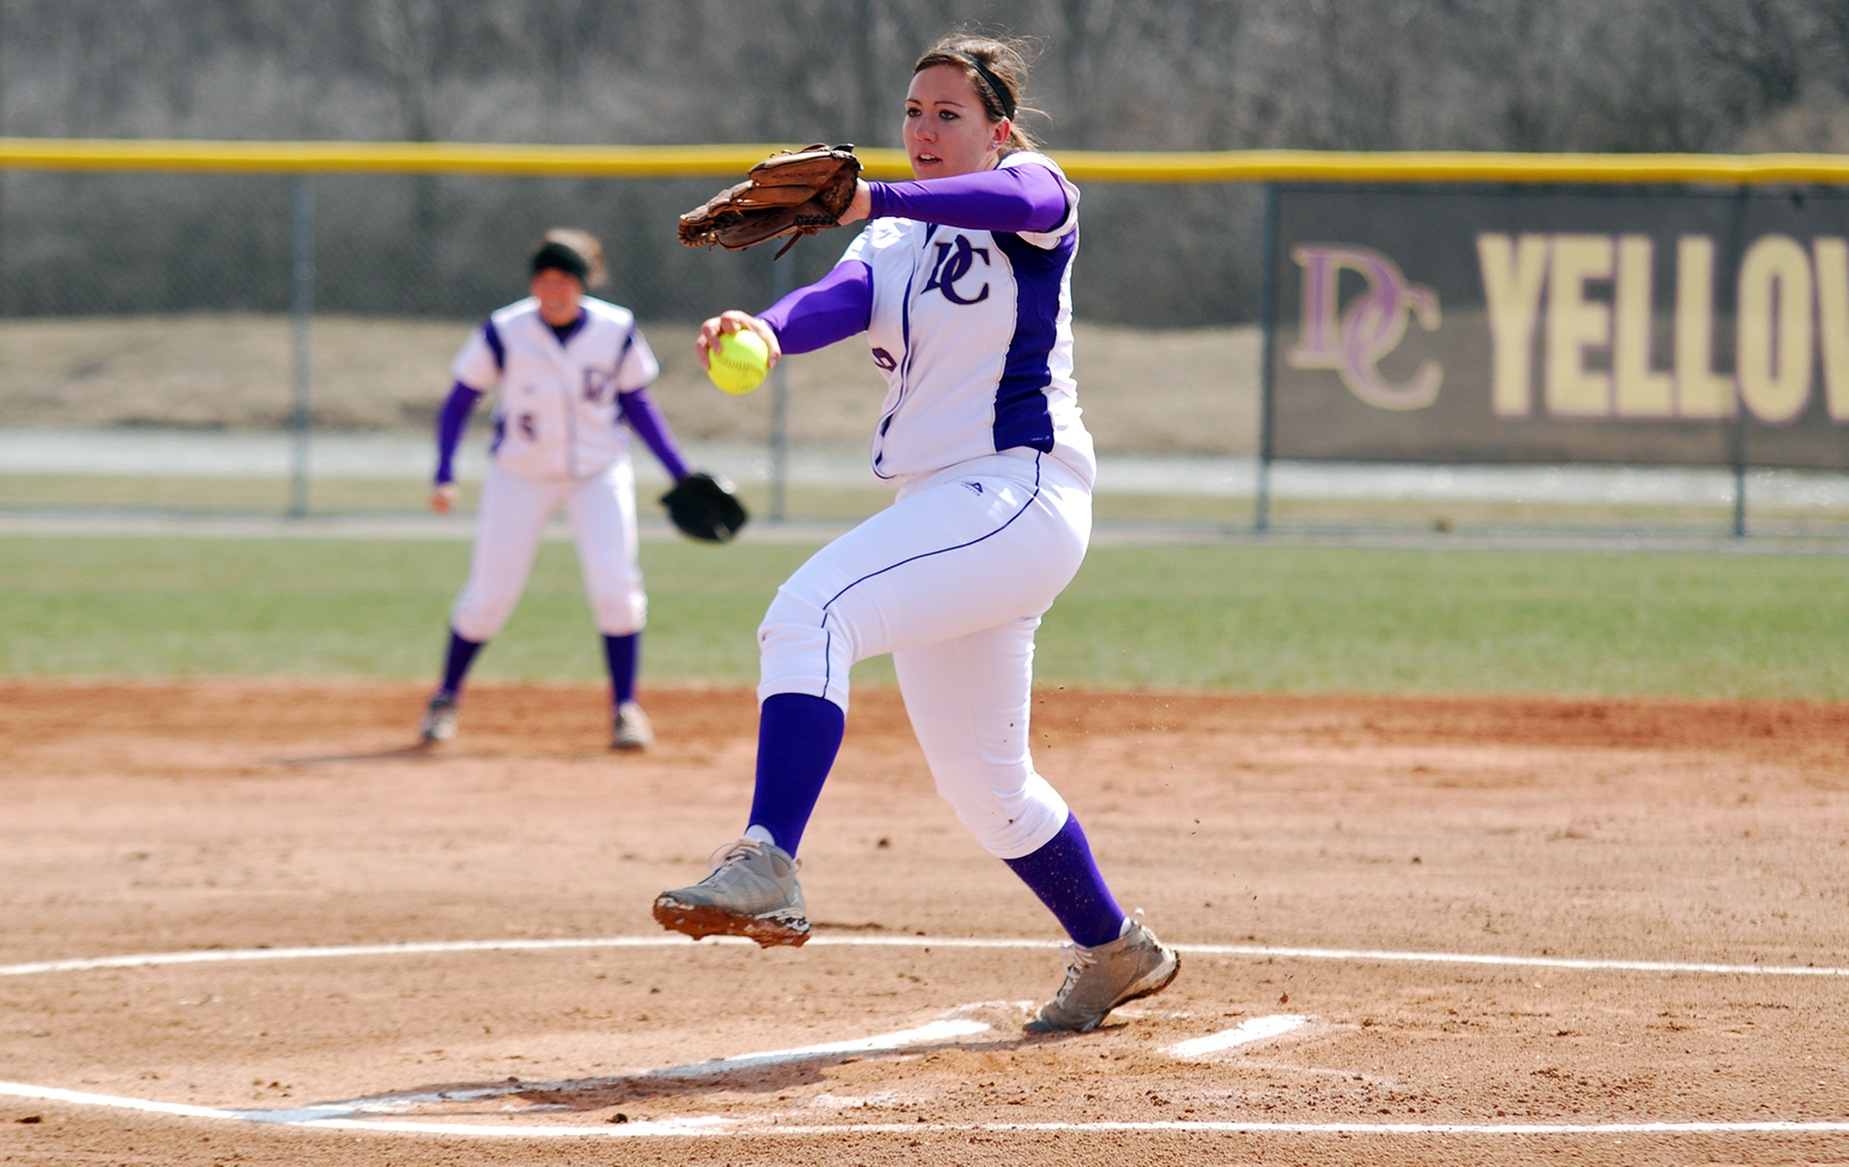 Shauna Bowers Tagged as HCAC Pitcher of the Week